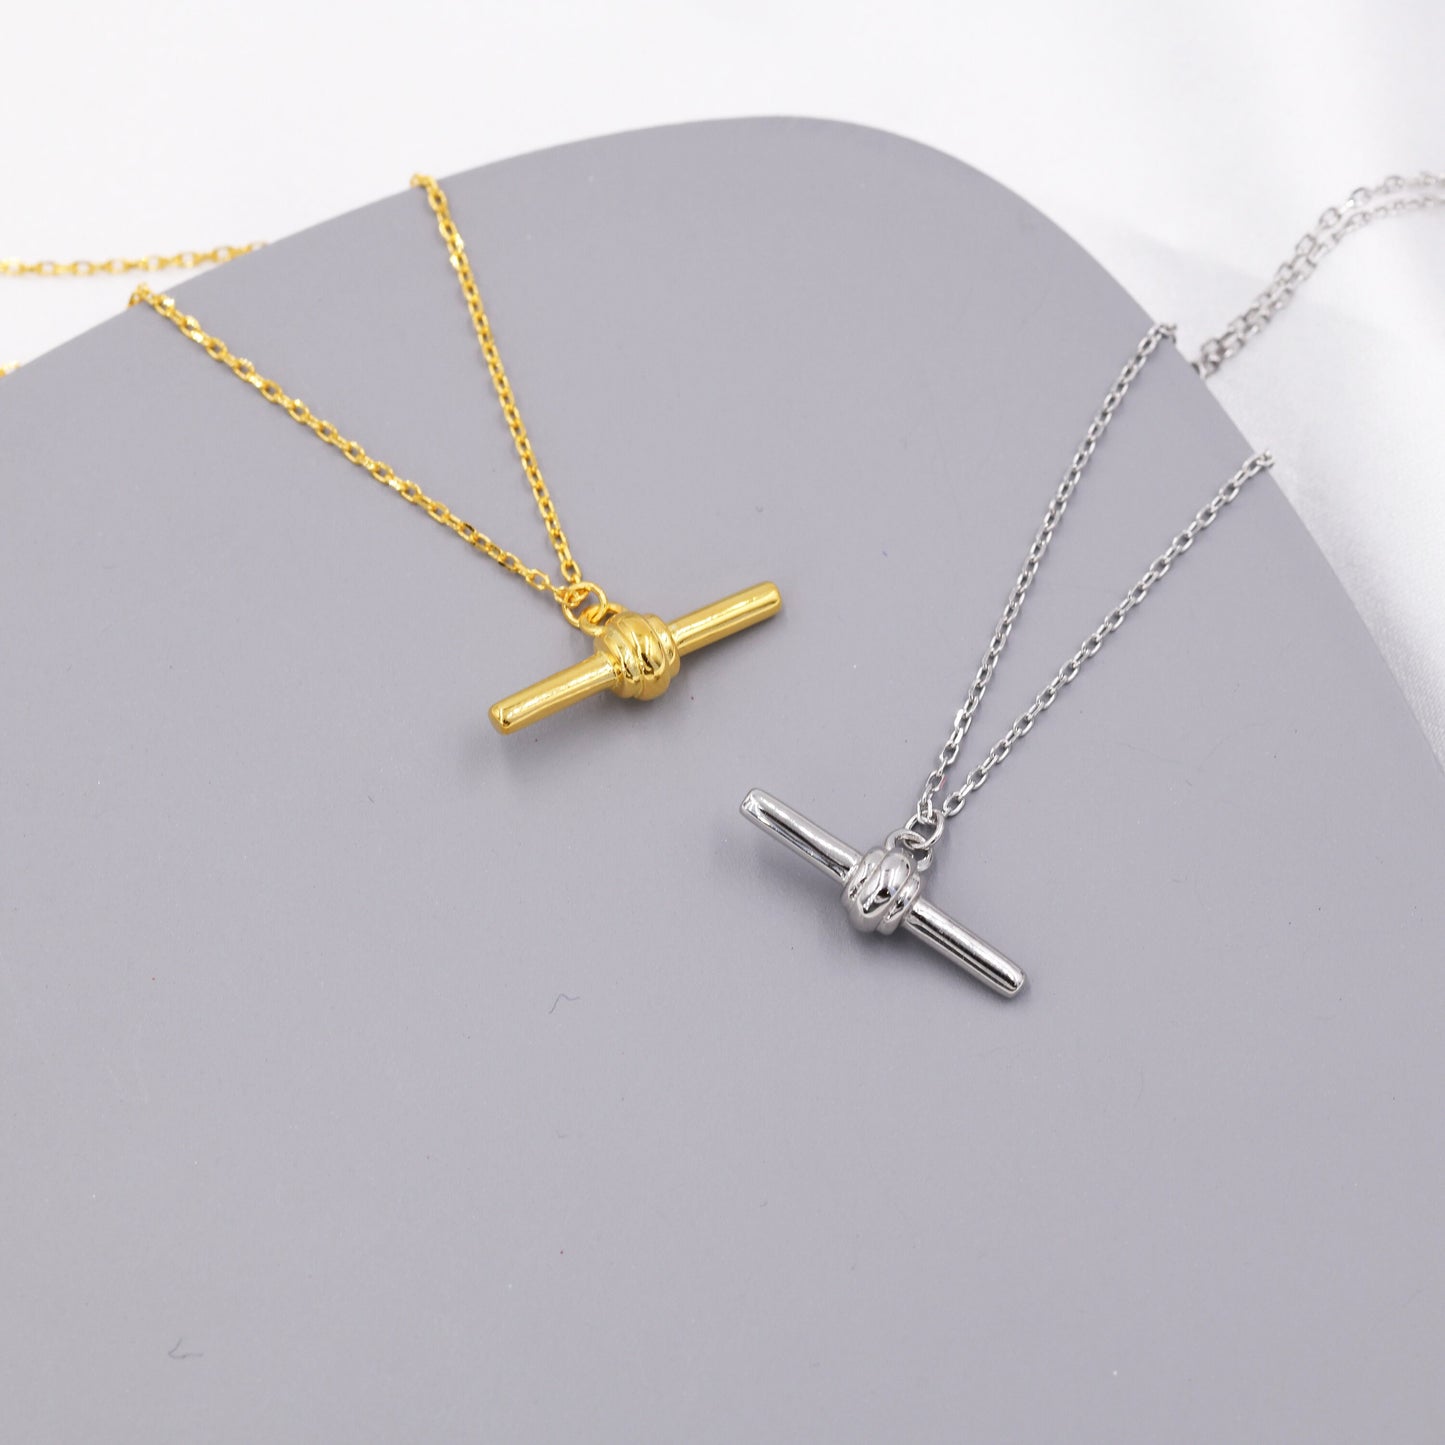 Balanced Bar Necklace in Sterling Silver, Silver or Gold,  Horizontal Bar Necklace